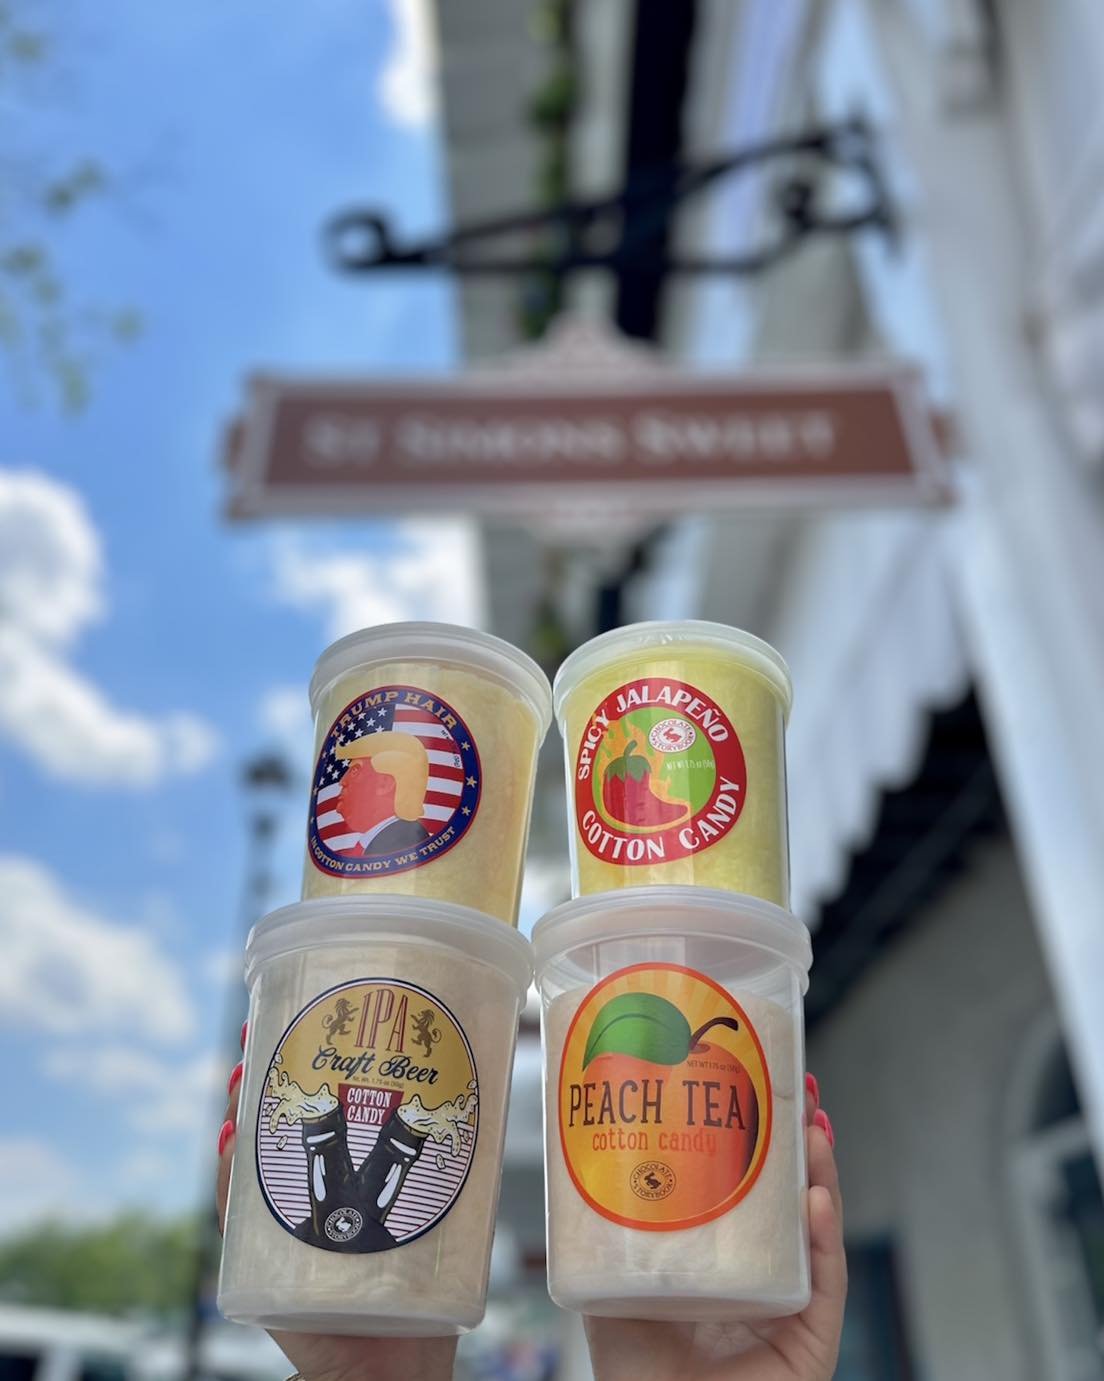 What&rsquo;s the craziest cotton candy flavor you&rsquo;ve tried?
.
.
.
#sweettooth #dessert #sweet #snacks #sweettreats #candyshop #candy #candystore #ssi #stsimonsisland #stsimons #handmade #homemade #cottoncandy #IPA #ranch #trumphair